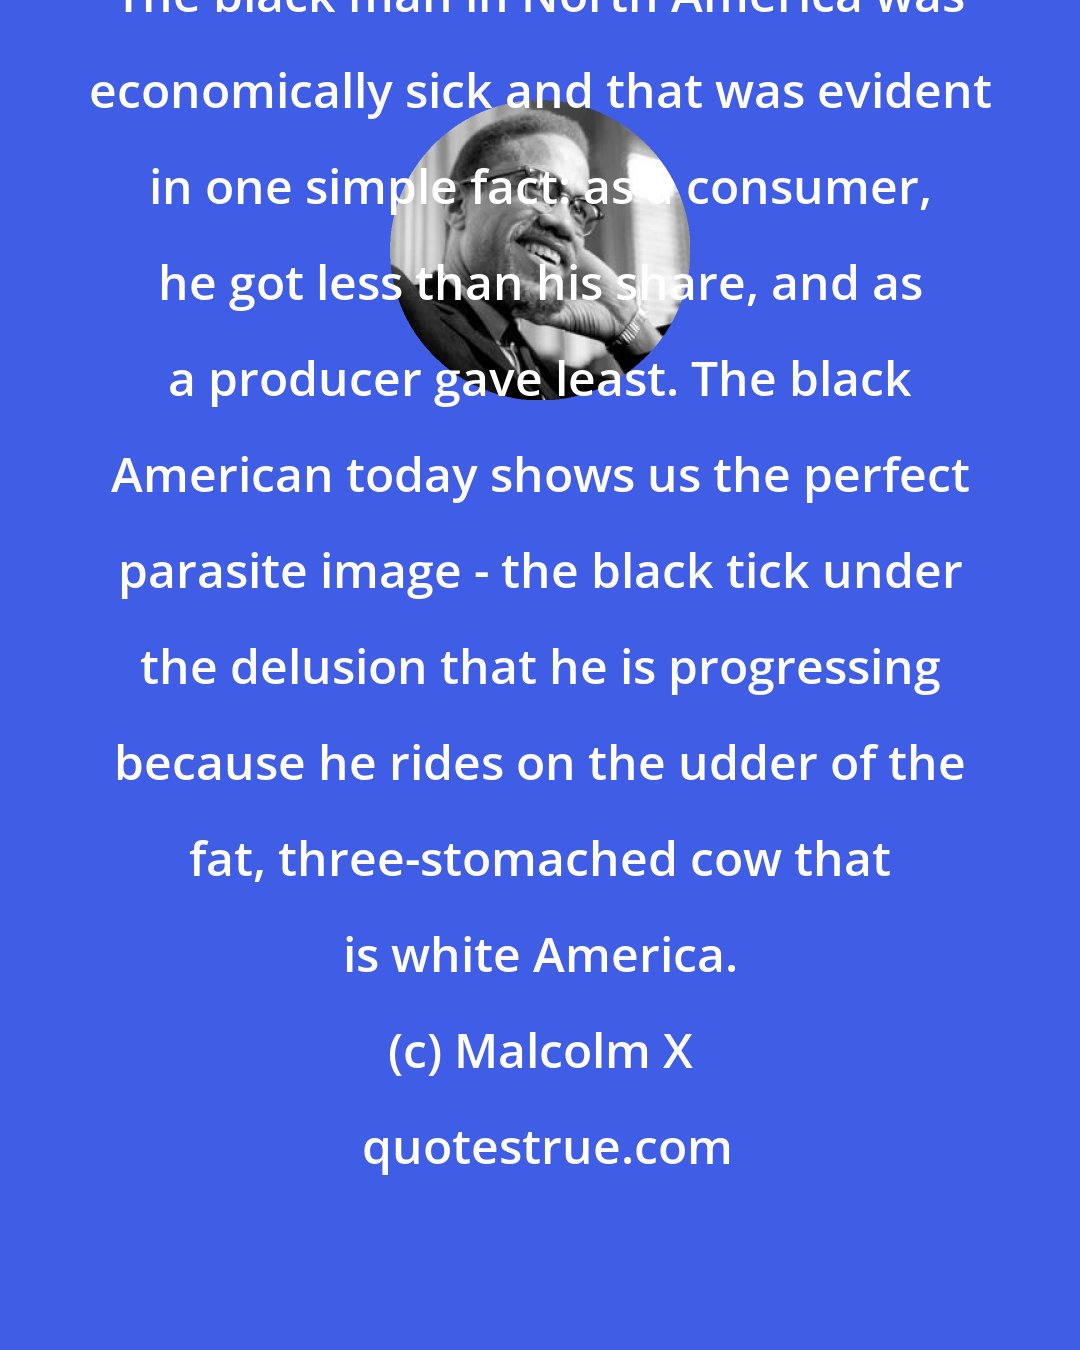 Malcolm X: The black man in North America was economically sick and that was evident in one simple fact: as a consumer, he got less than his share, and as a producer gave least. The black American today shows us the perfect parasite image - the black tick under the delusion that he is progressing because he rides on the udder of the fat, three-stomached cow that is white America.